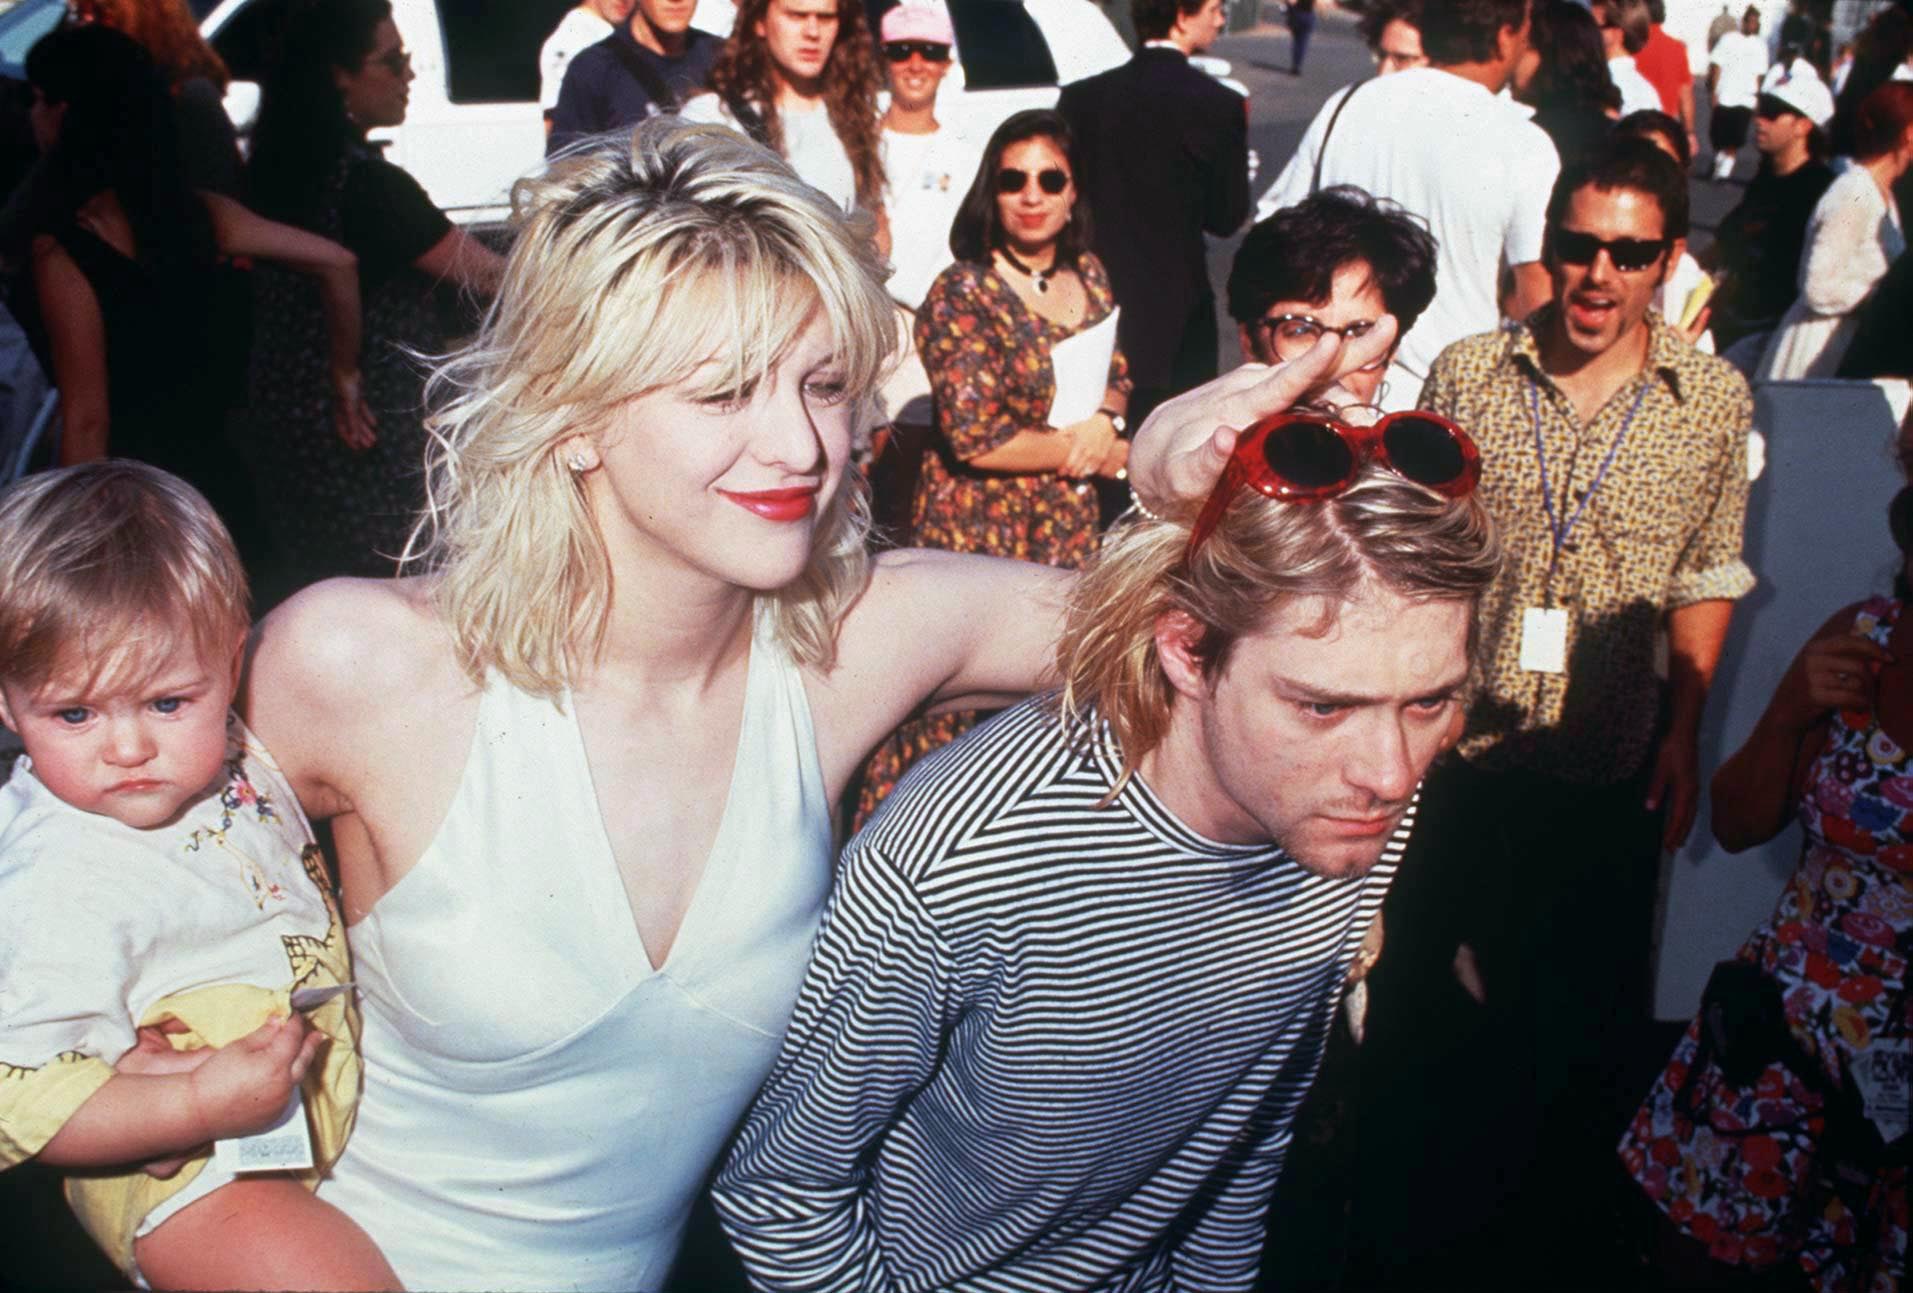 Courtney Love and Kurt Cobain with their daughter Frances Vean at the MTV Awards in LA, 1993